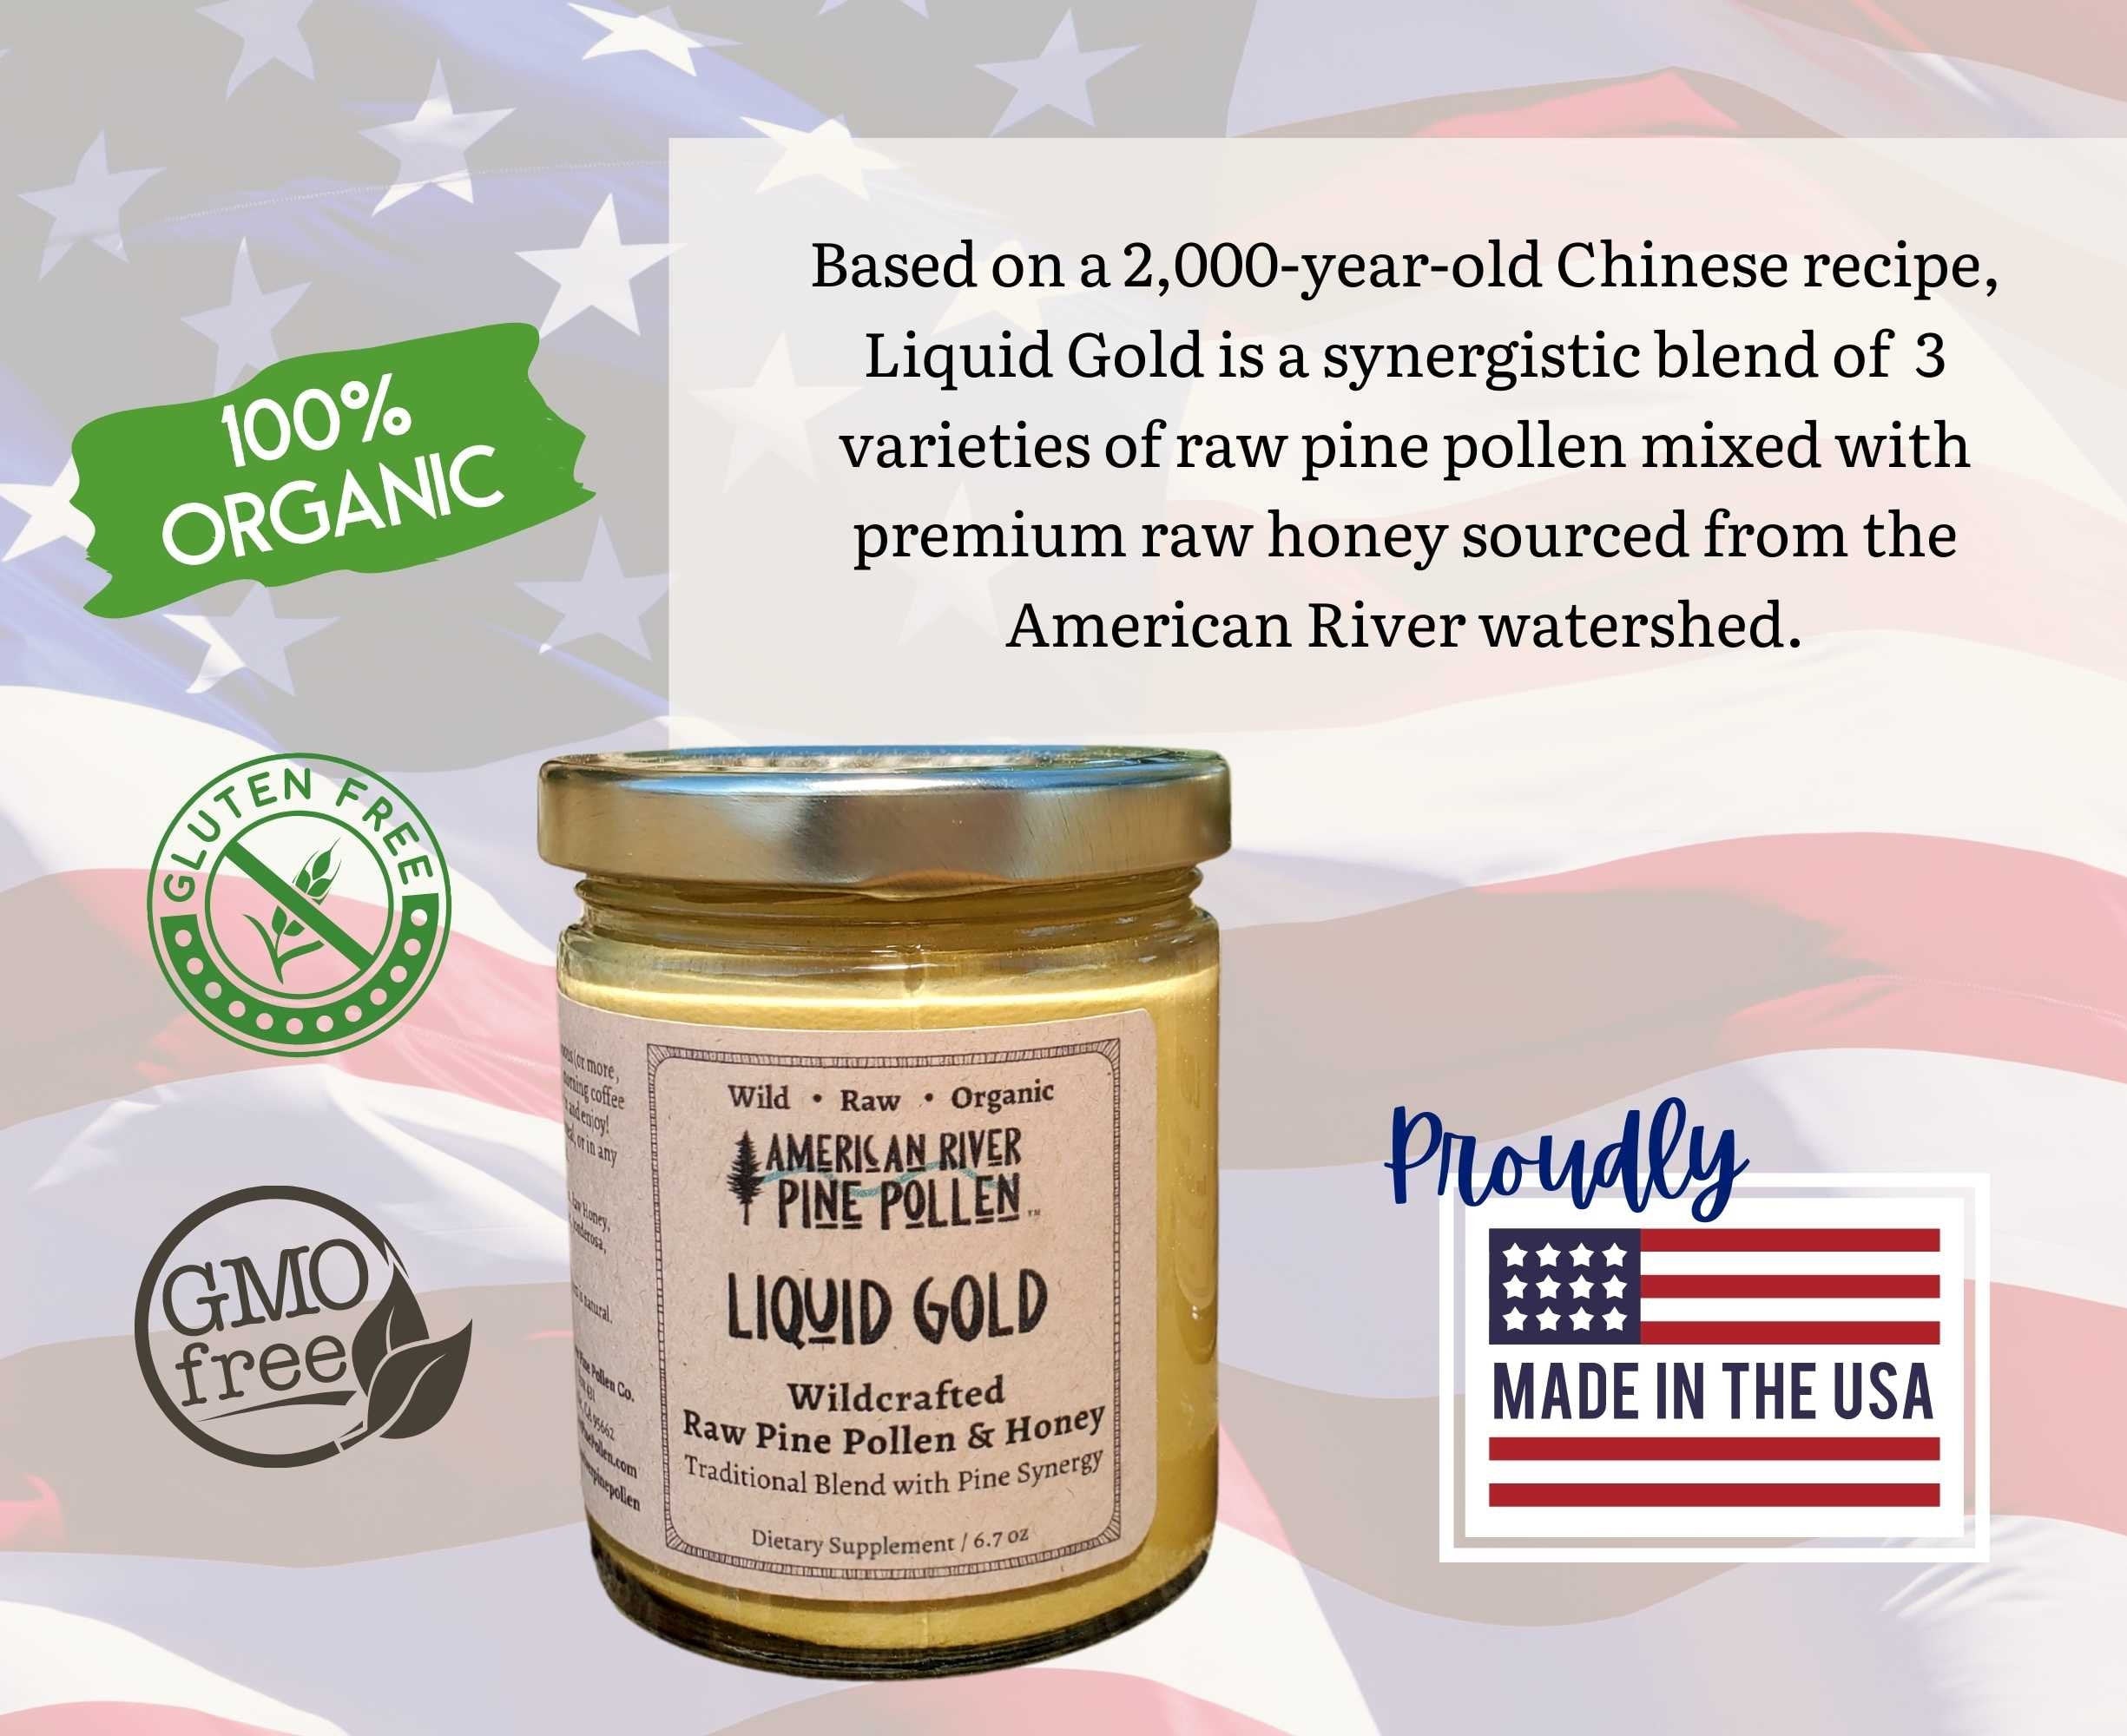 Liquid Gold - Wildcrafted Raw Pine Pollen and Honey - Traditional